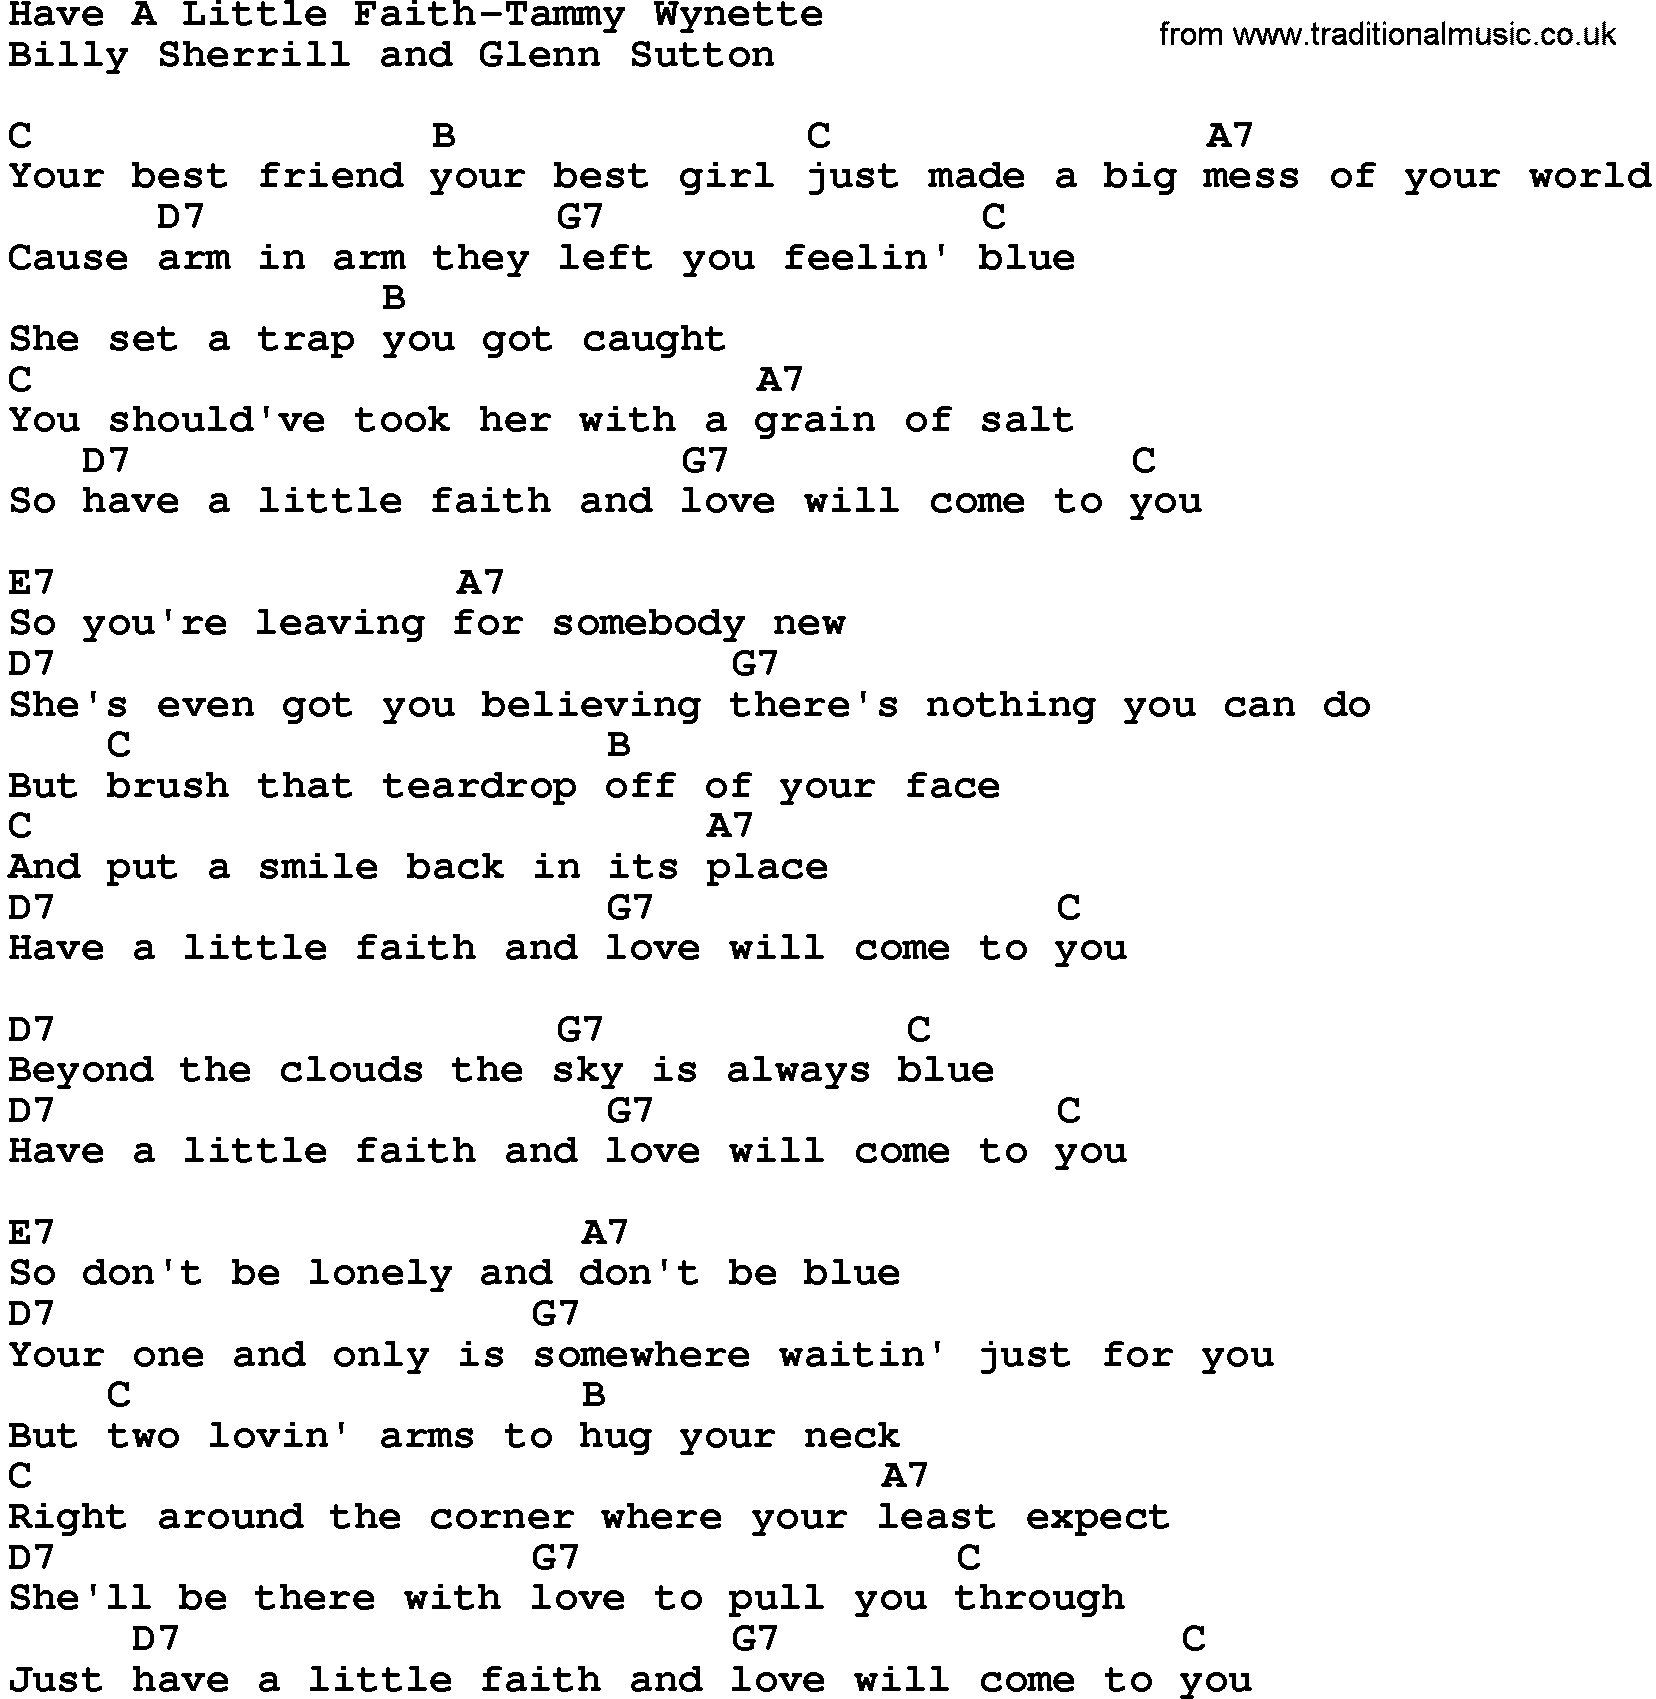 Country music song: Have A Little Faith-Tammy Wynette lyrics and chords